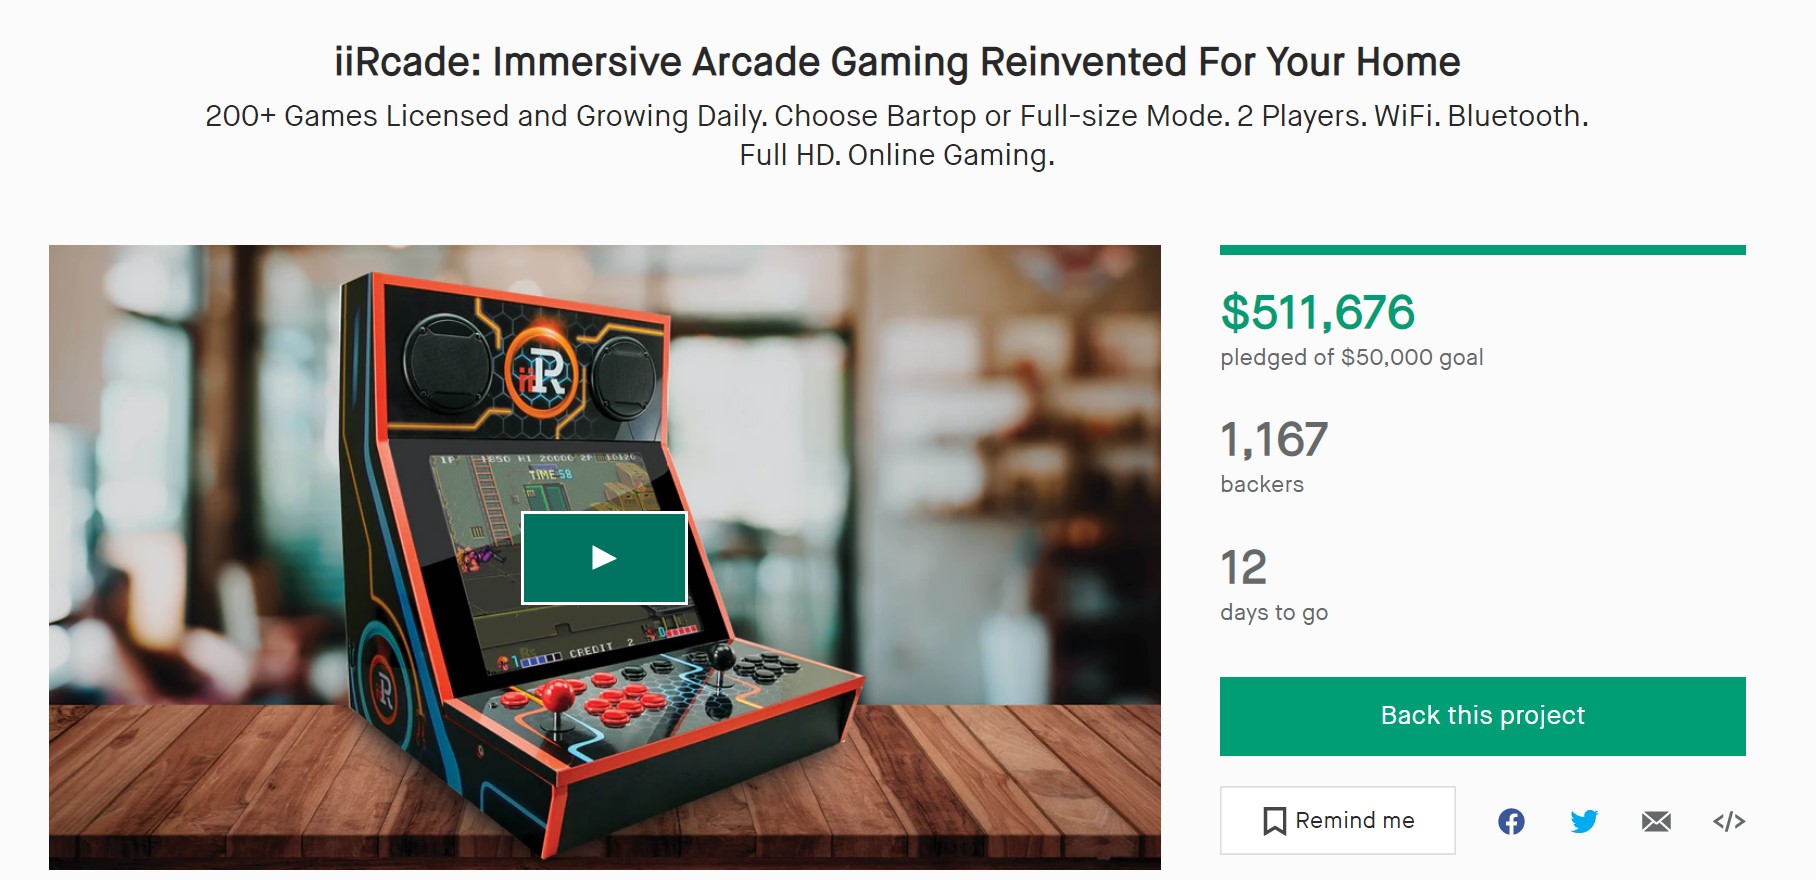 Kickstarter is one of our favorite crowdfunding websites.